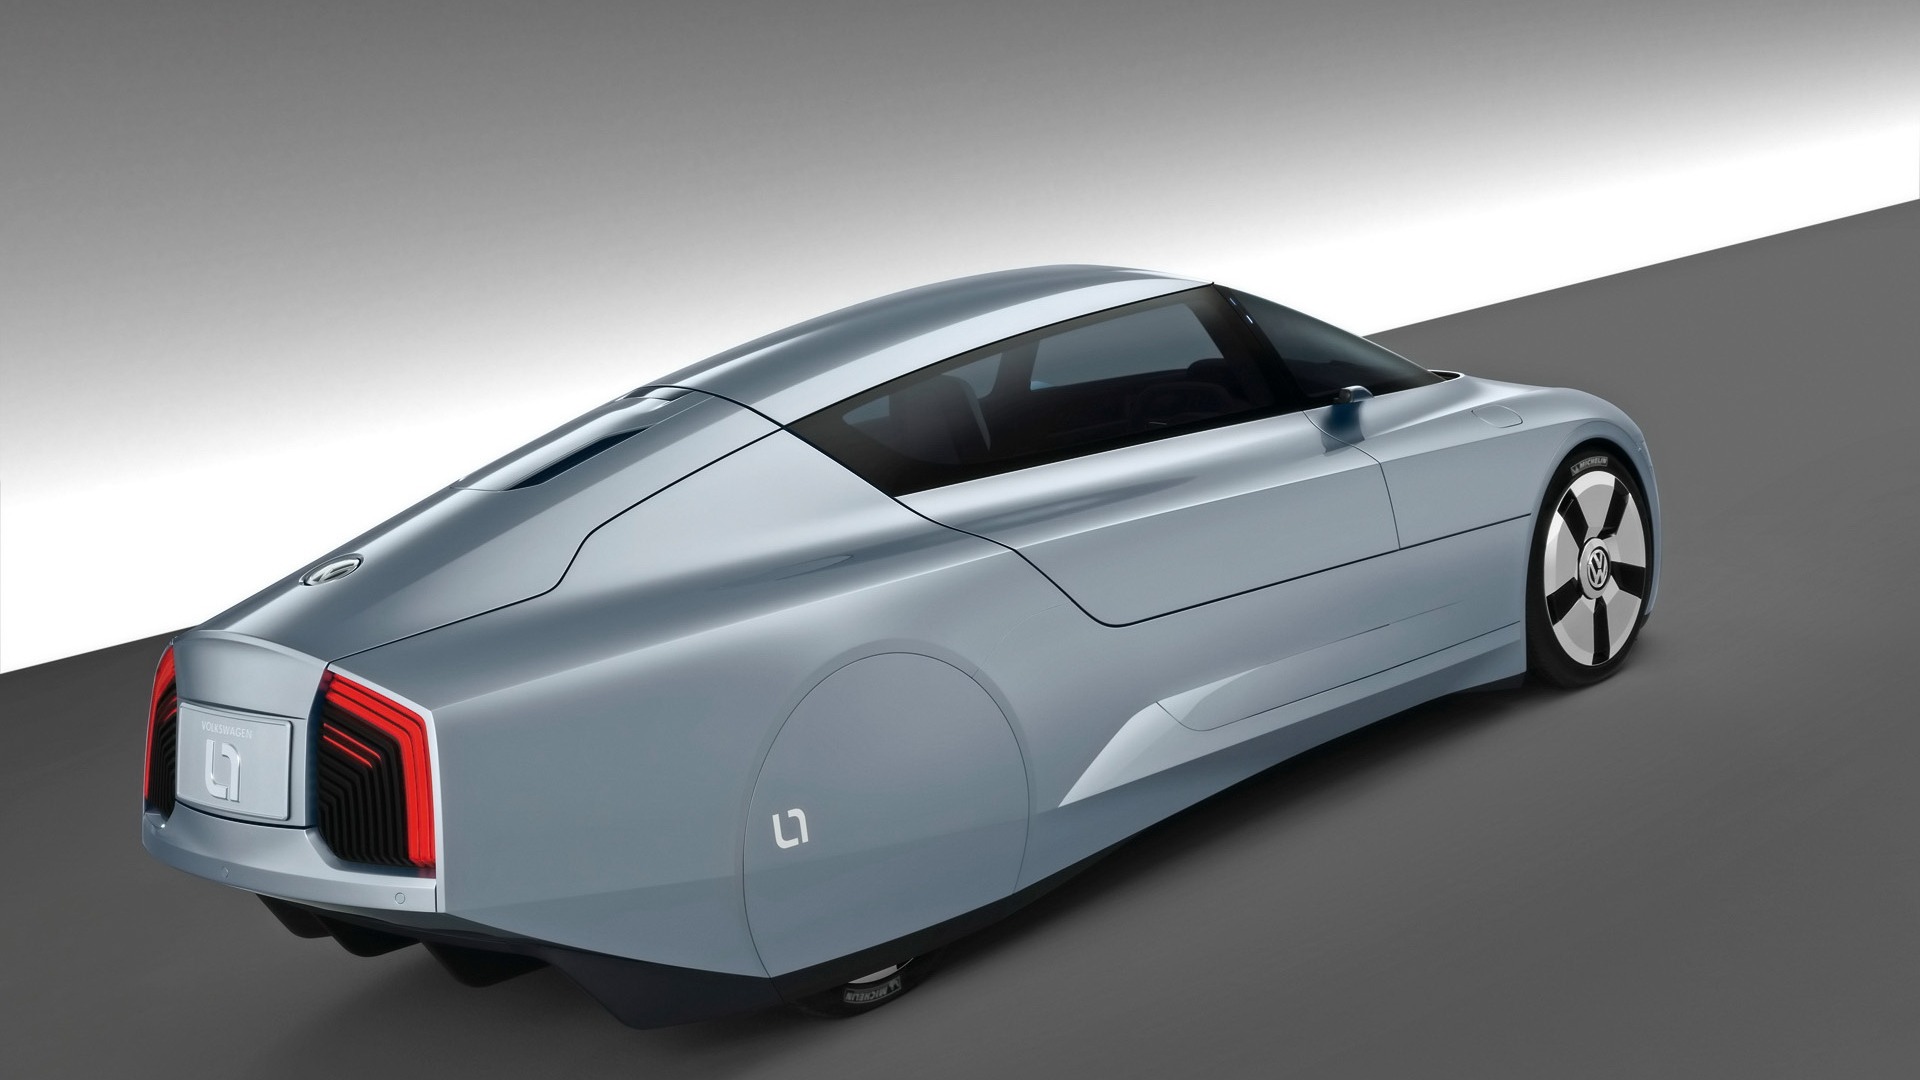 Volkswagen L1 Tapety Concept Car #23 - 1920x1080